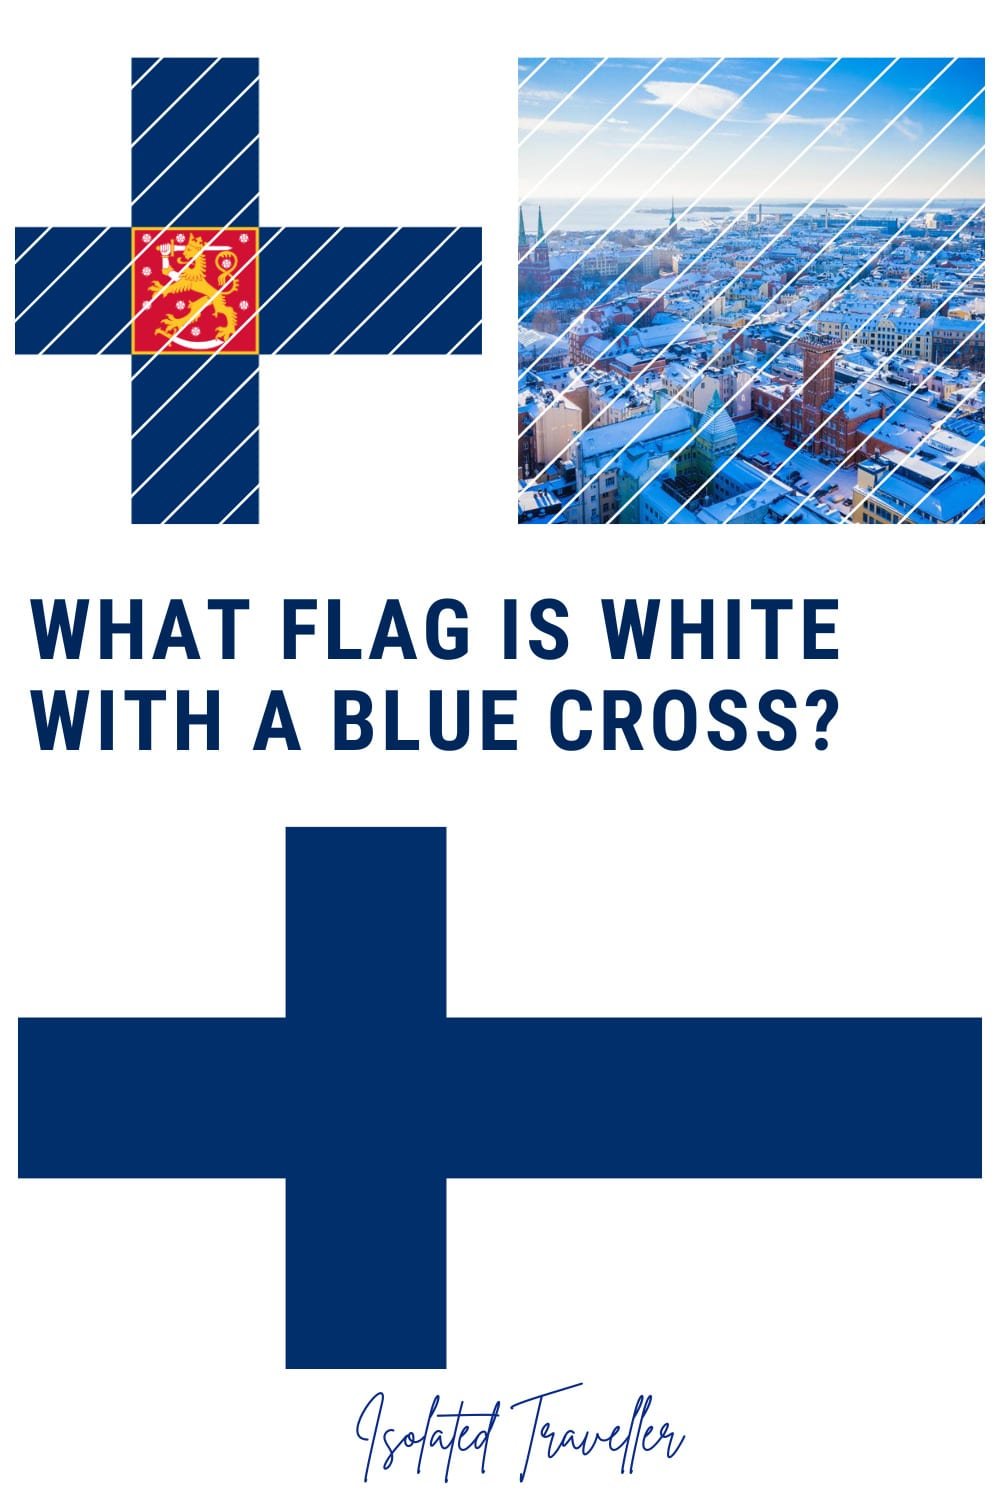 What flag is white with a blue cross?